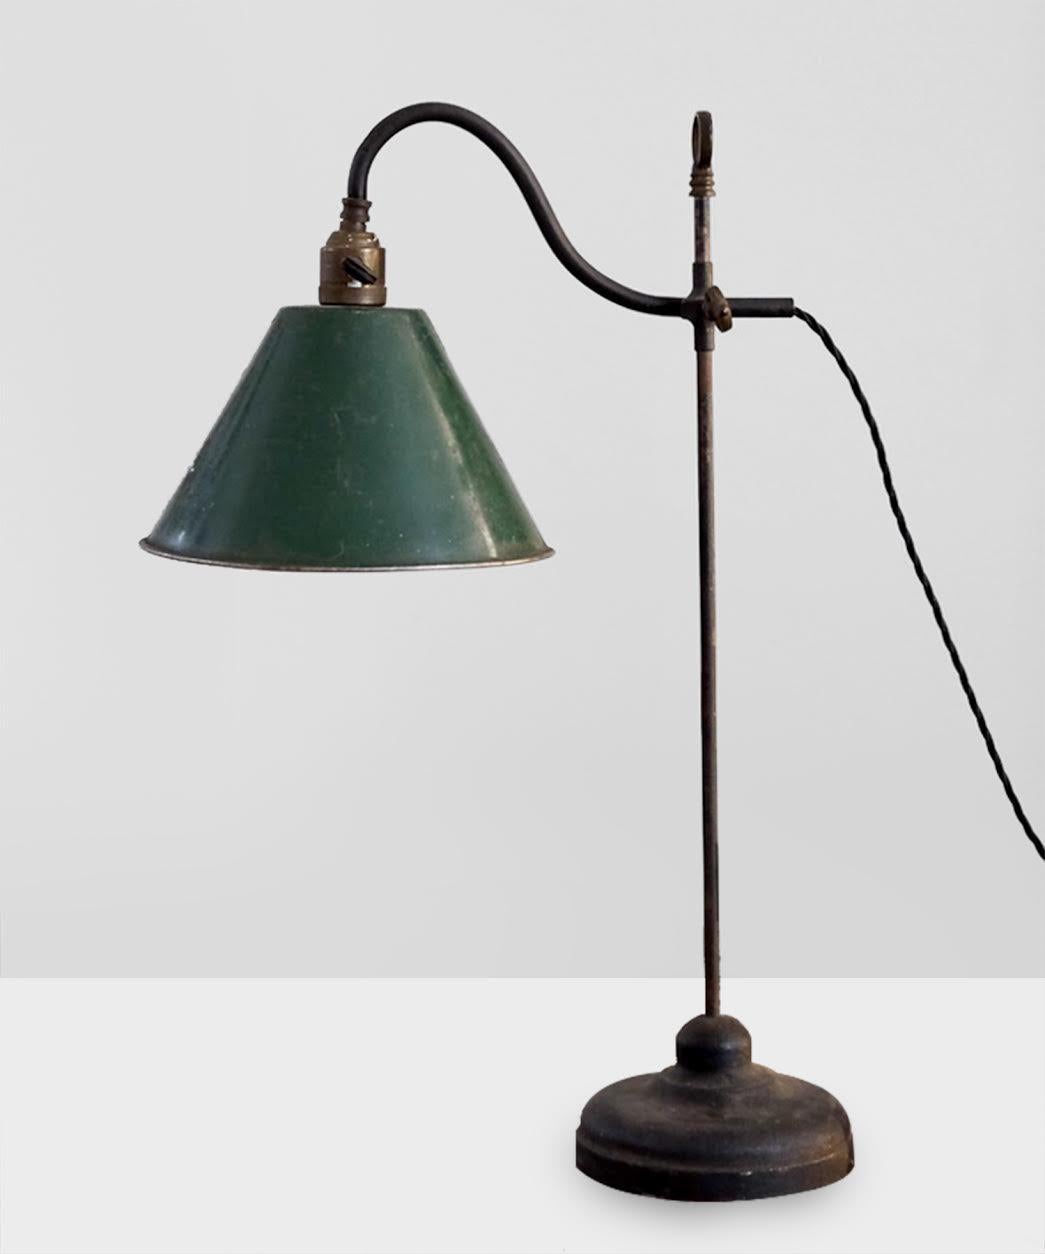 Green enamel shade in original finish on beautiful patinated brass stand.